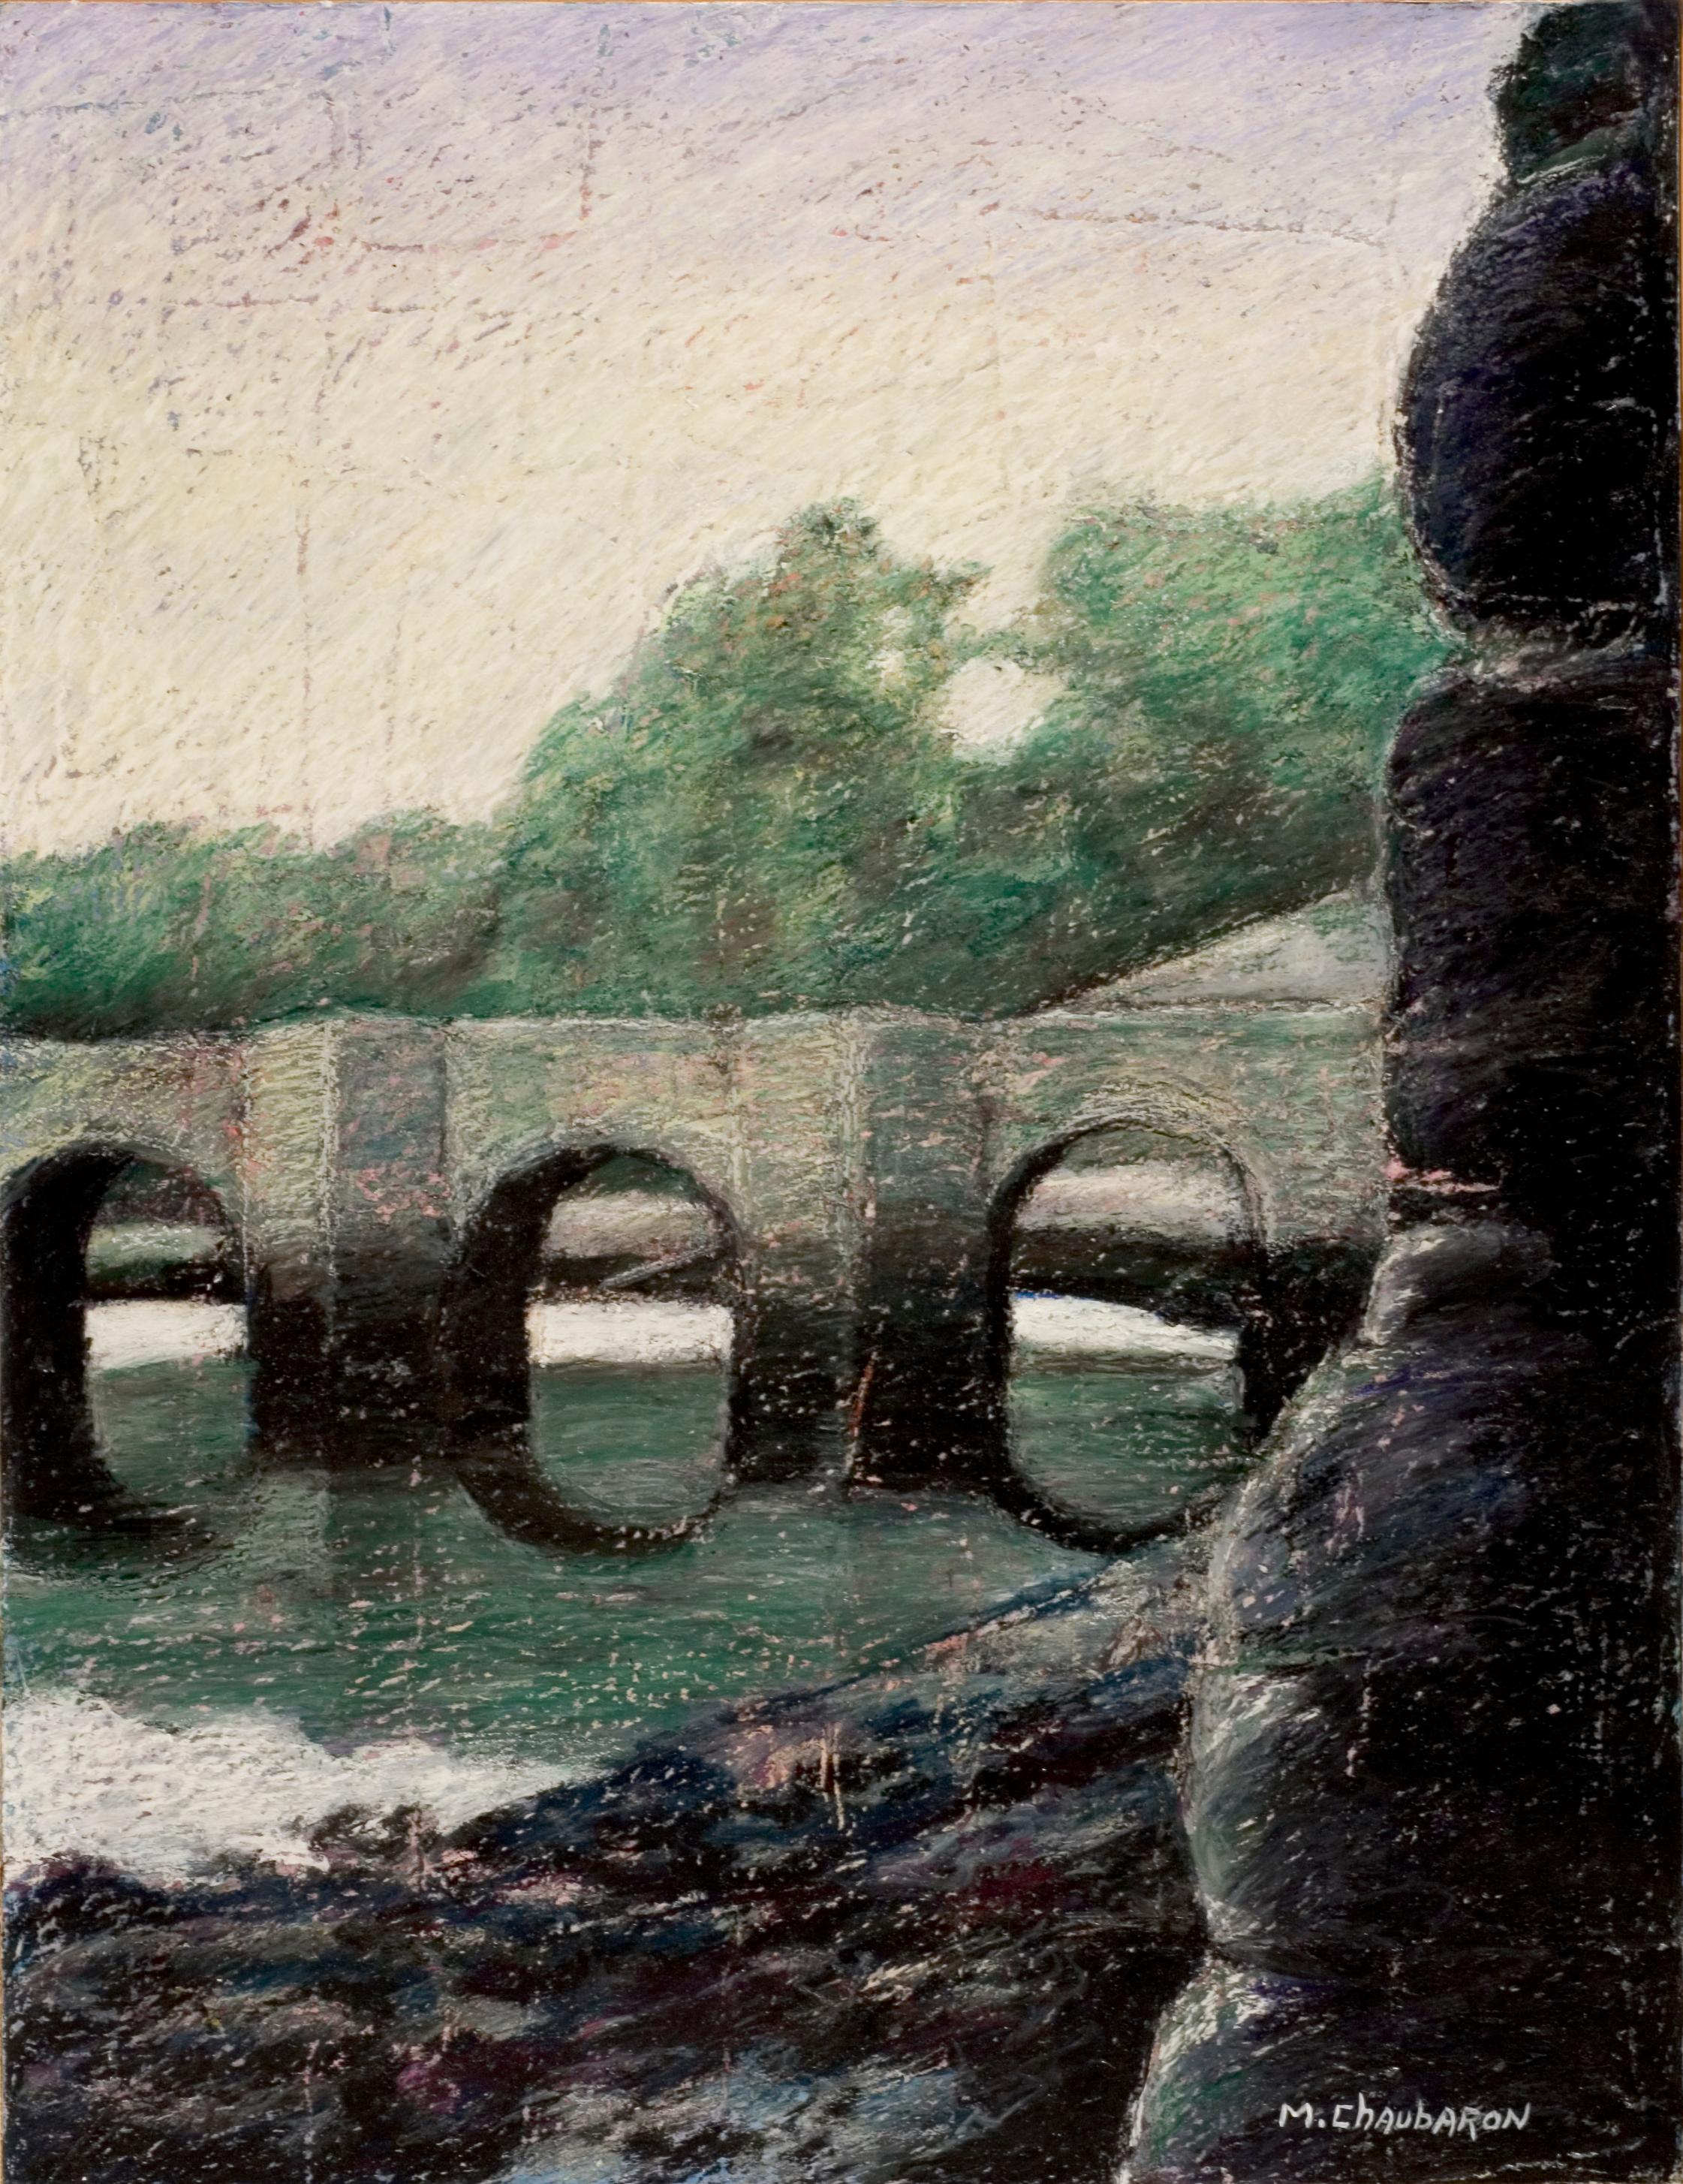 Marc Chaubaron Landscape Painting - Stone Arch Bridge on the River at Dusk or Dawn with Green Trees Oil Pastel